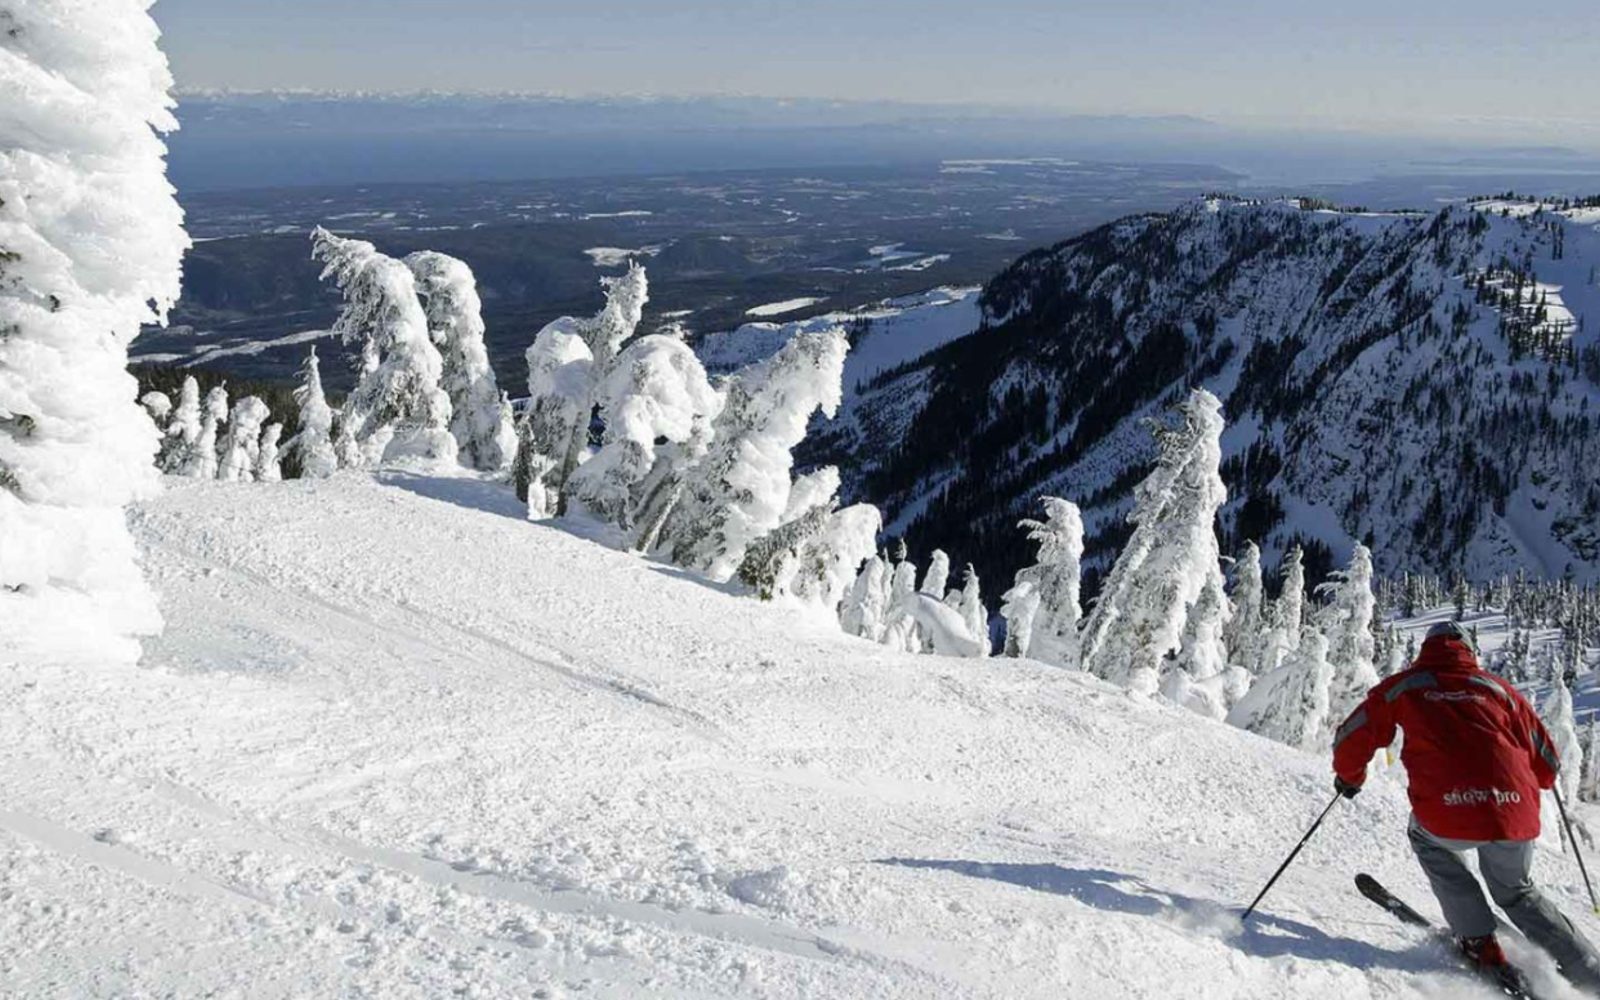 skiing on mt. washington, one of the best things to do near victoria in january.